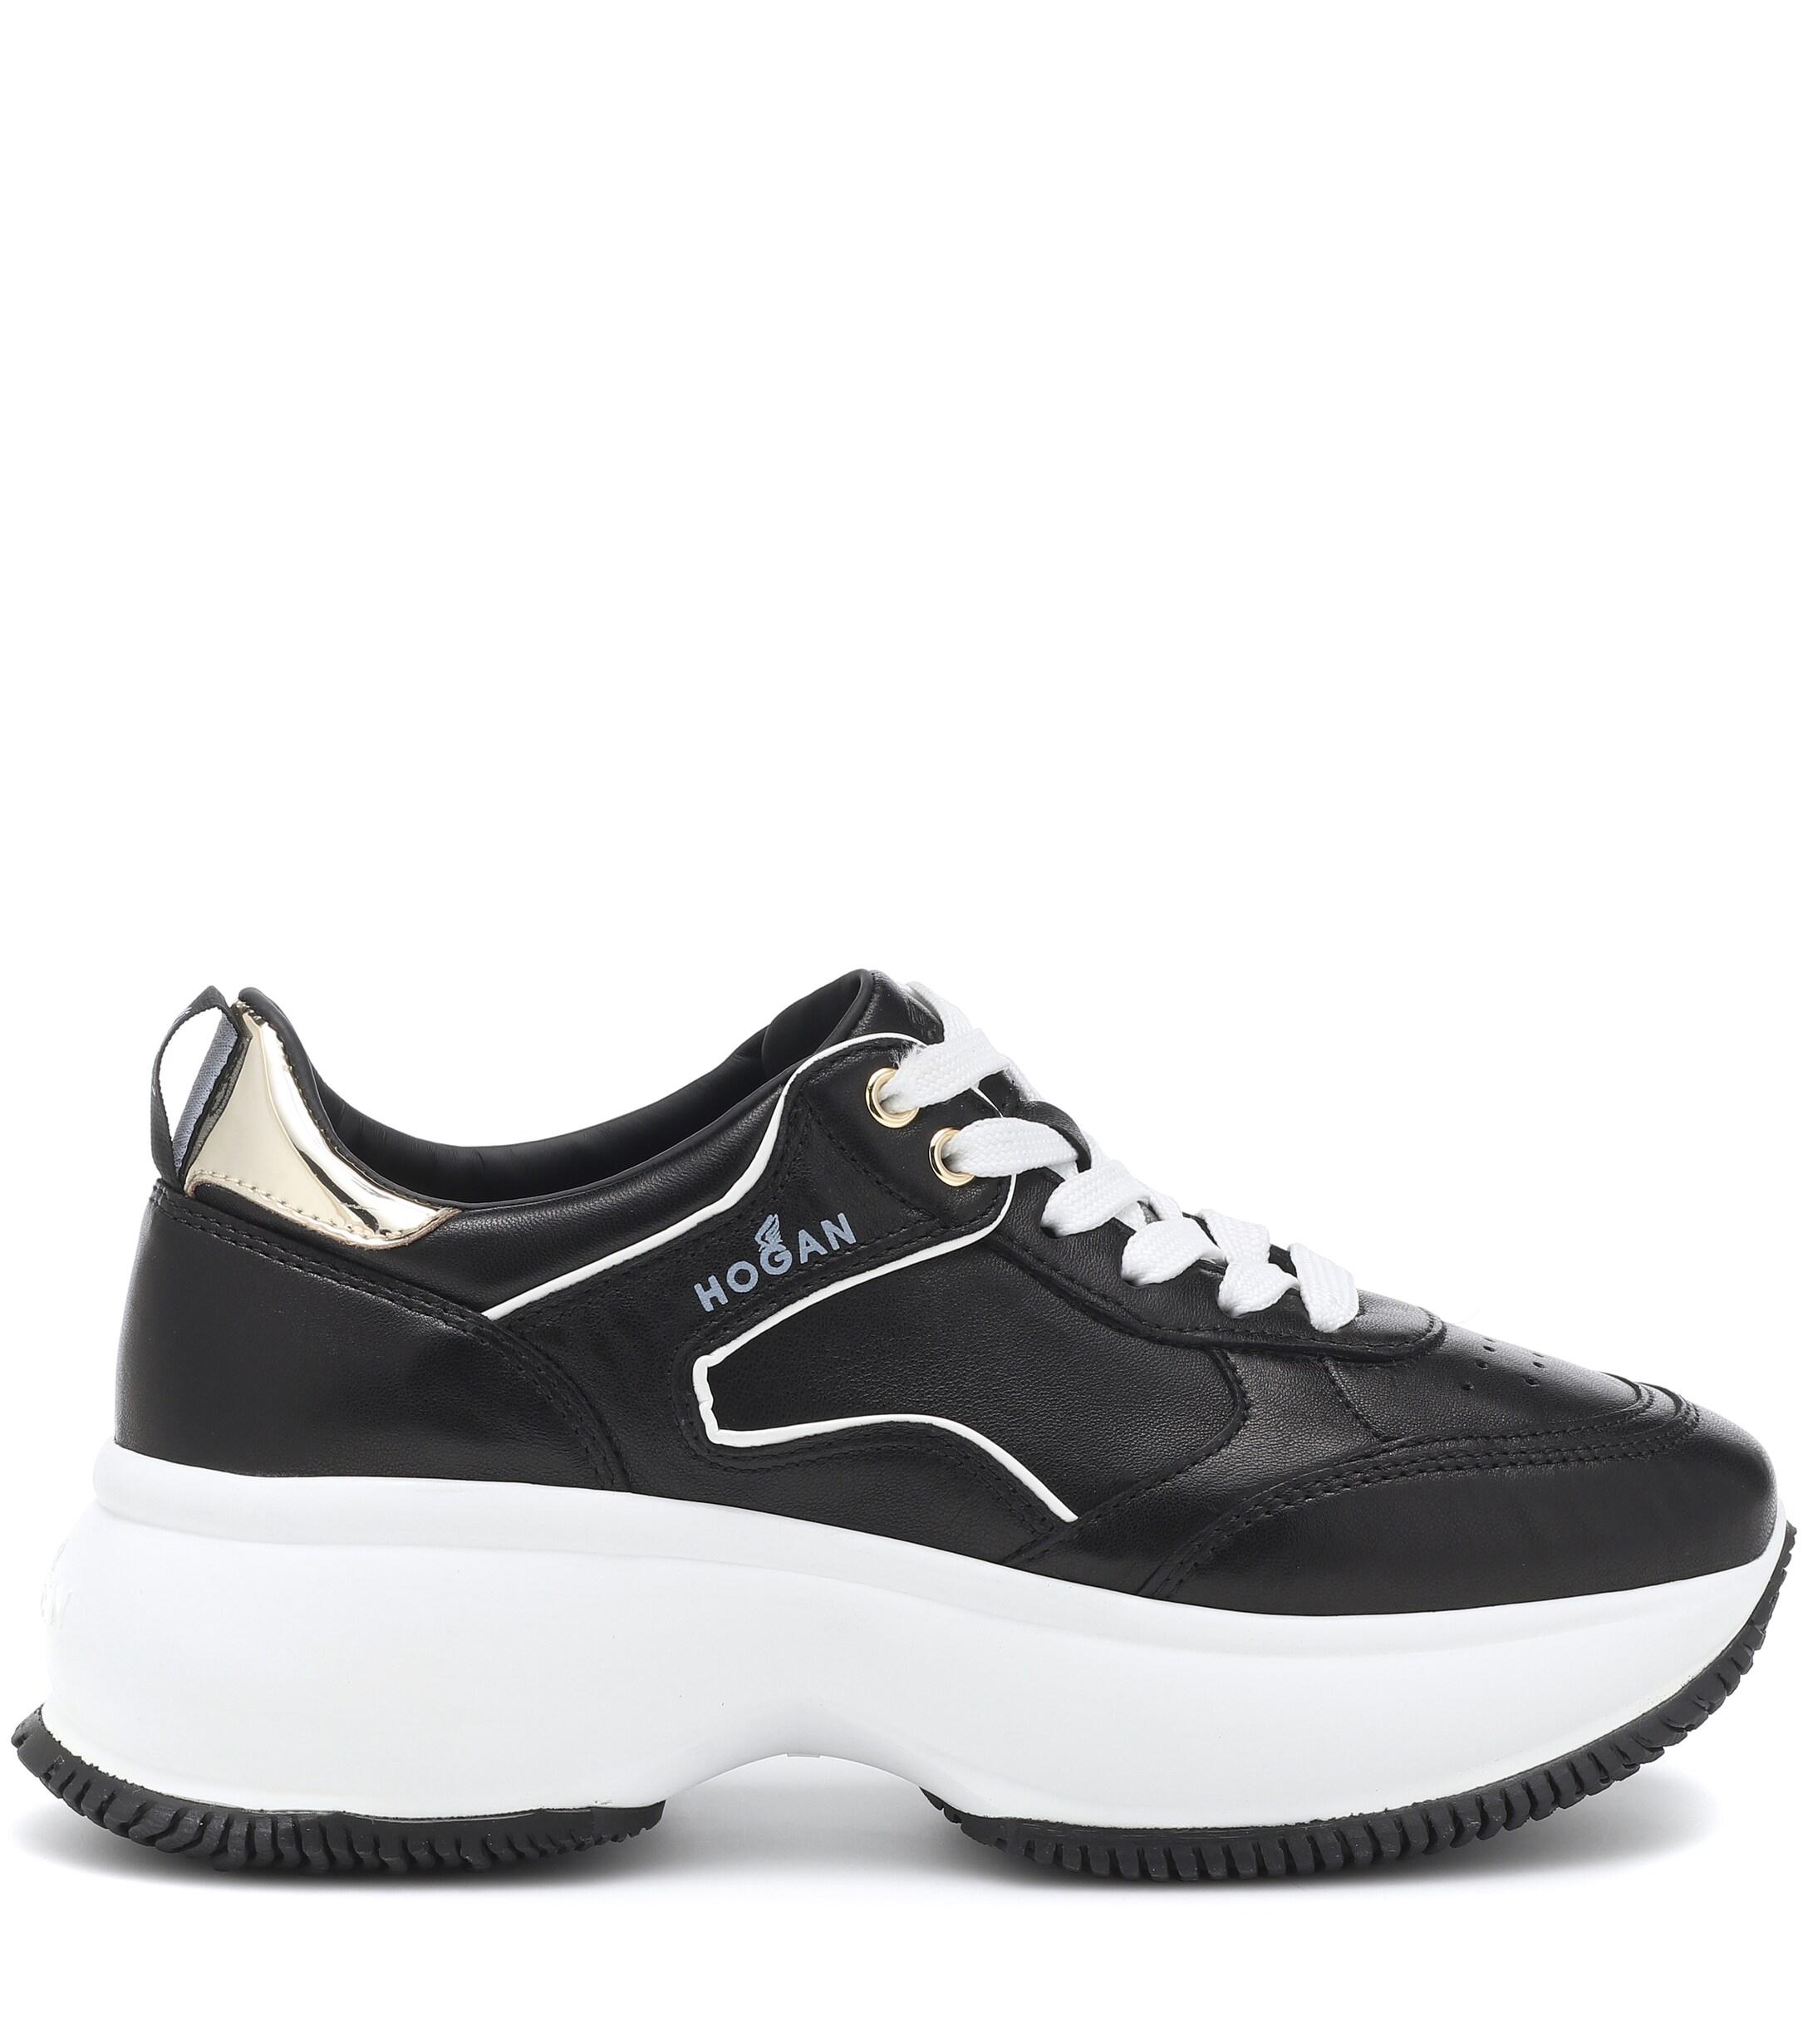 Hogan Maxi I Active Leather Sneakers in Nero (Black) - Save 30% - Lyst